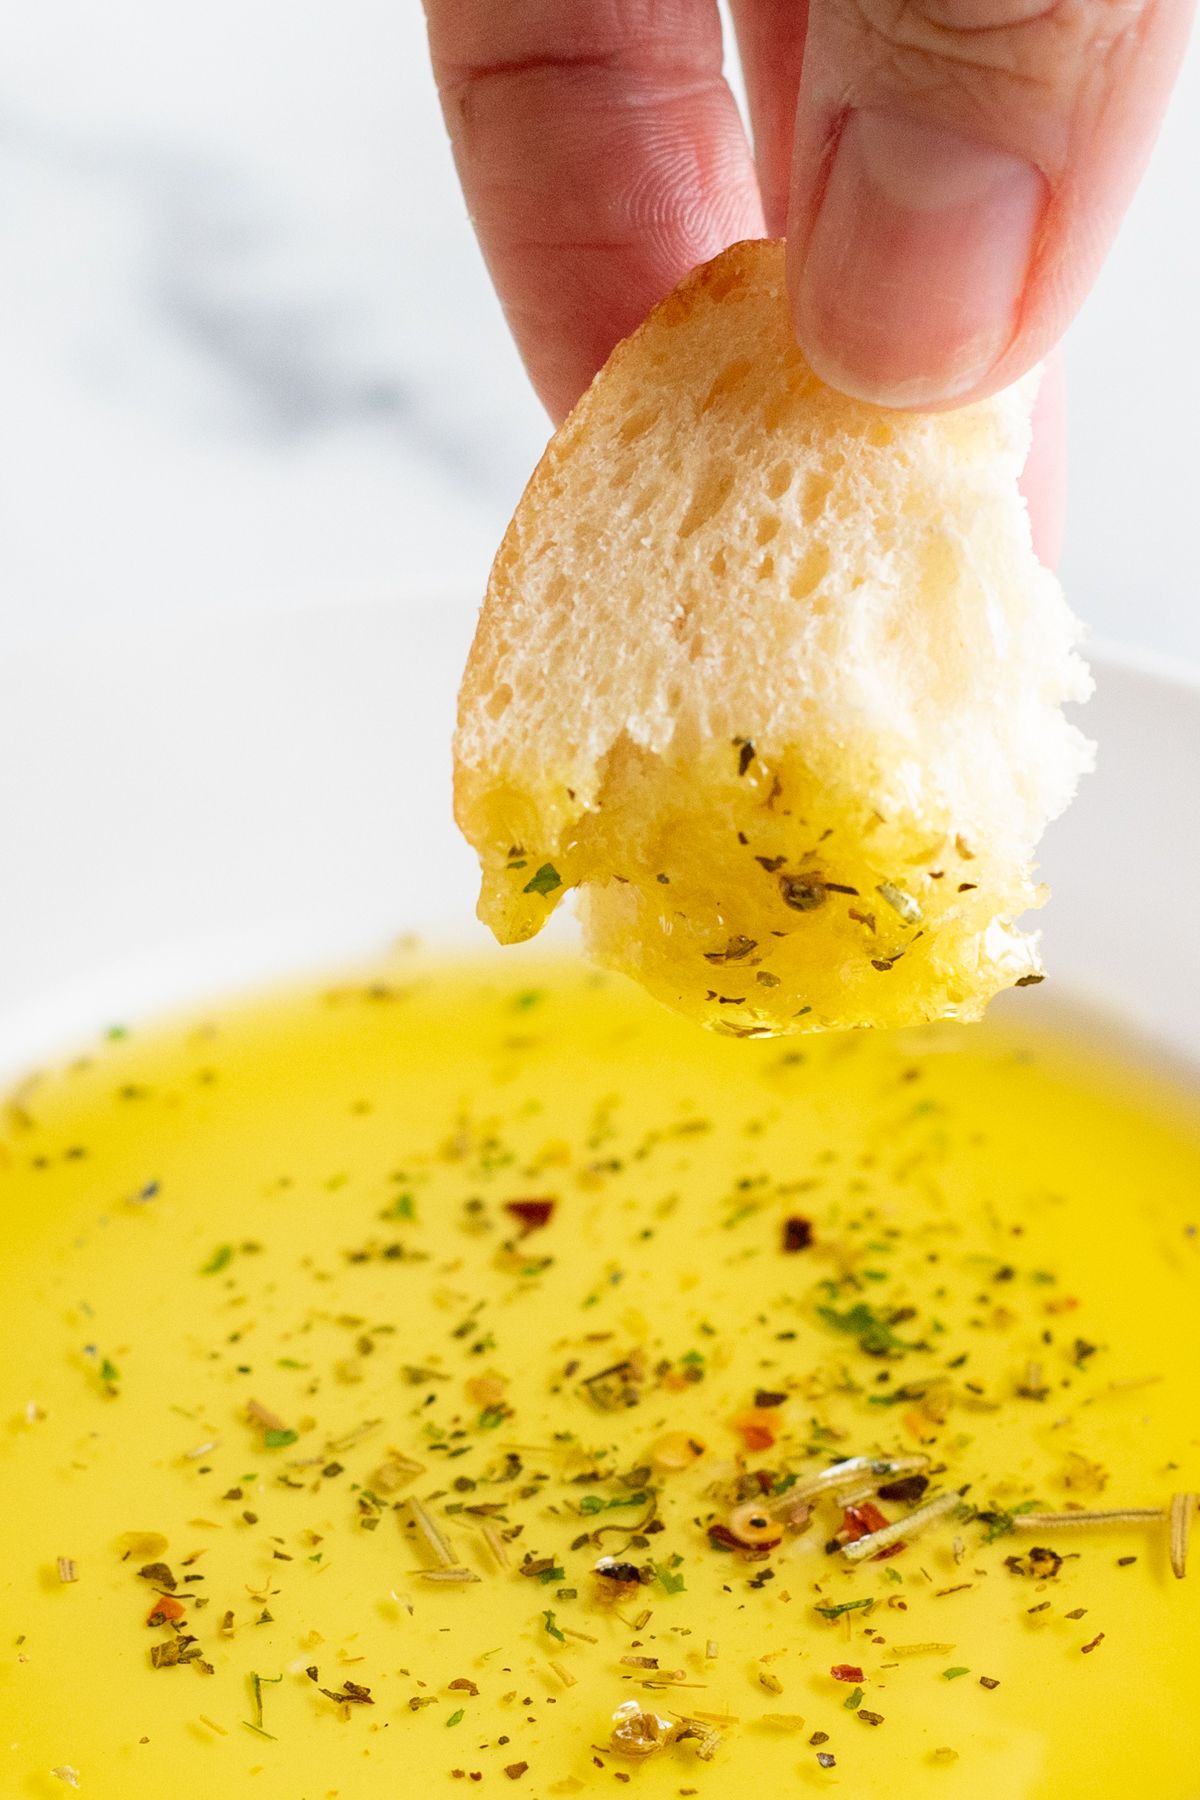 A hand dipping a piece of bread onto a plate of olive oil bread dip.